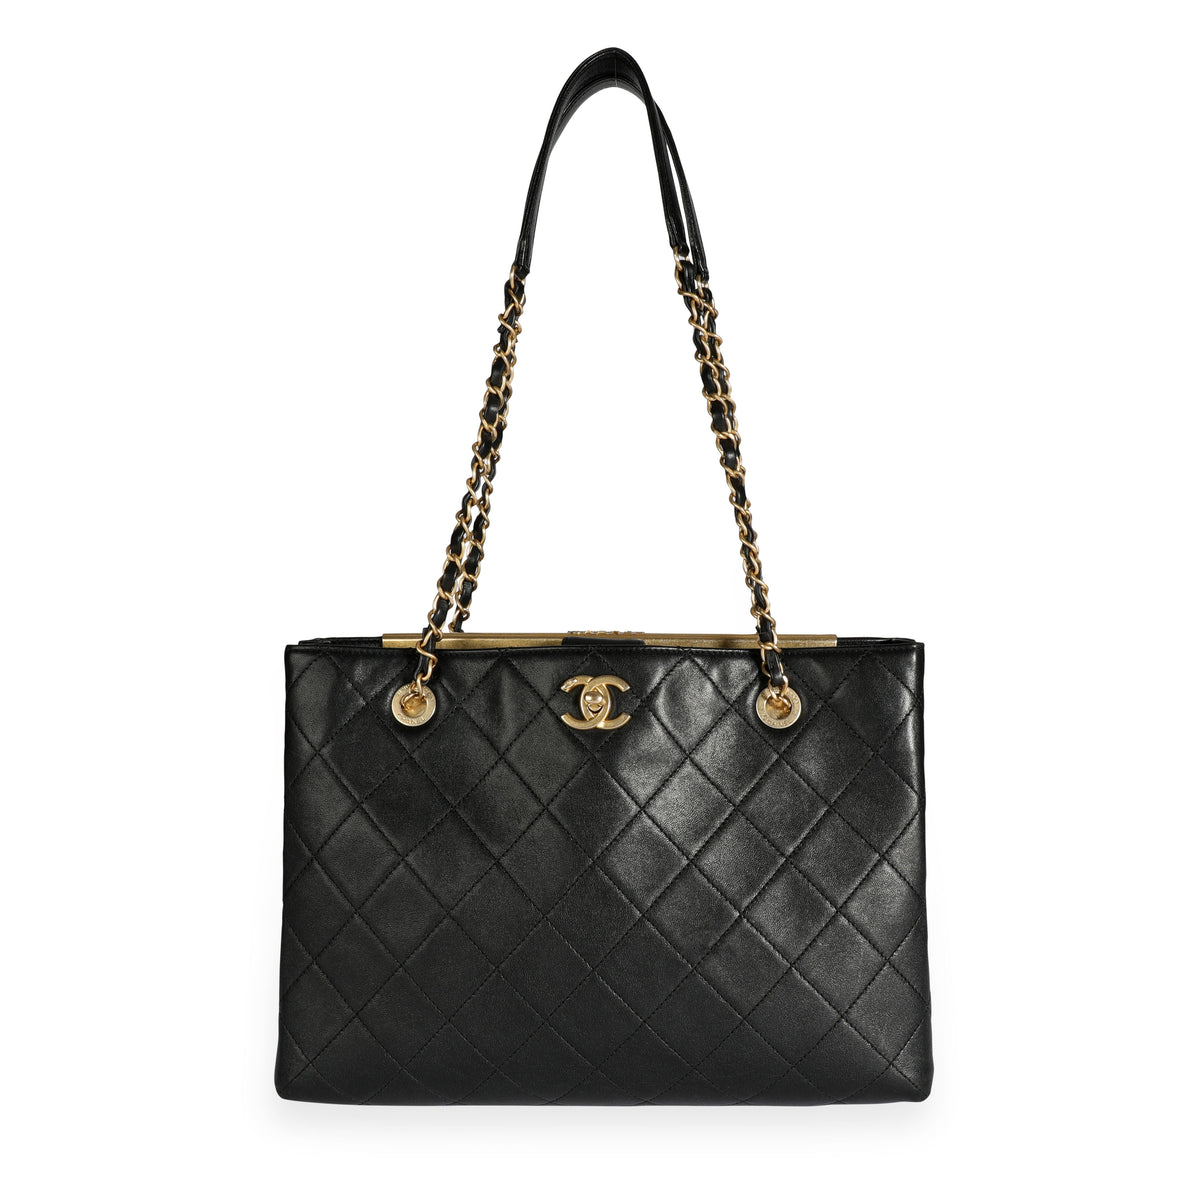 Chanel Black Quilted Lambskin Large Shopping Bag, myGemma